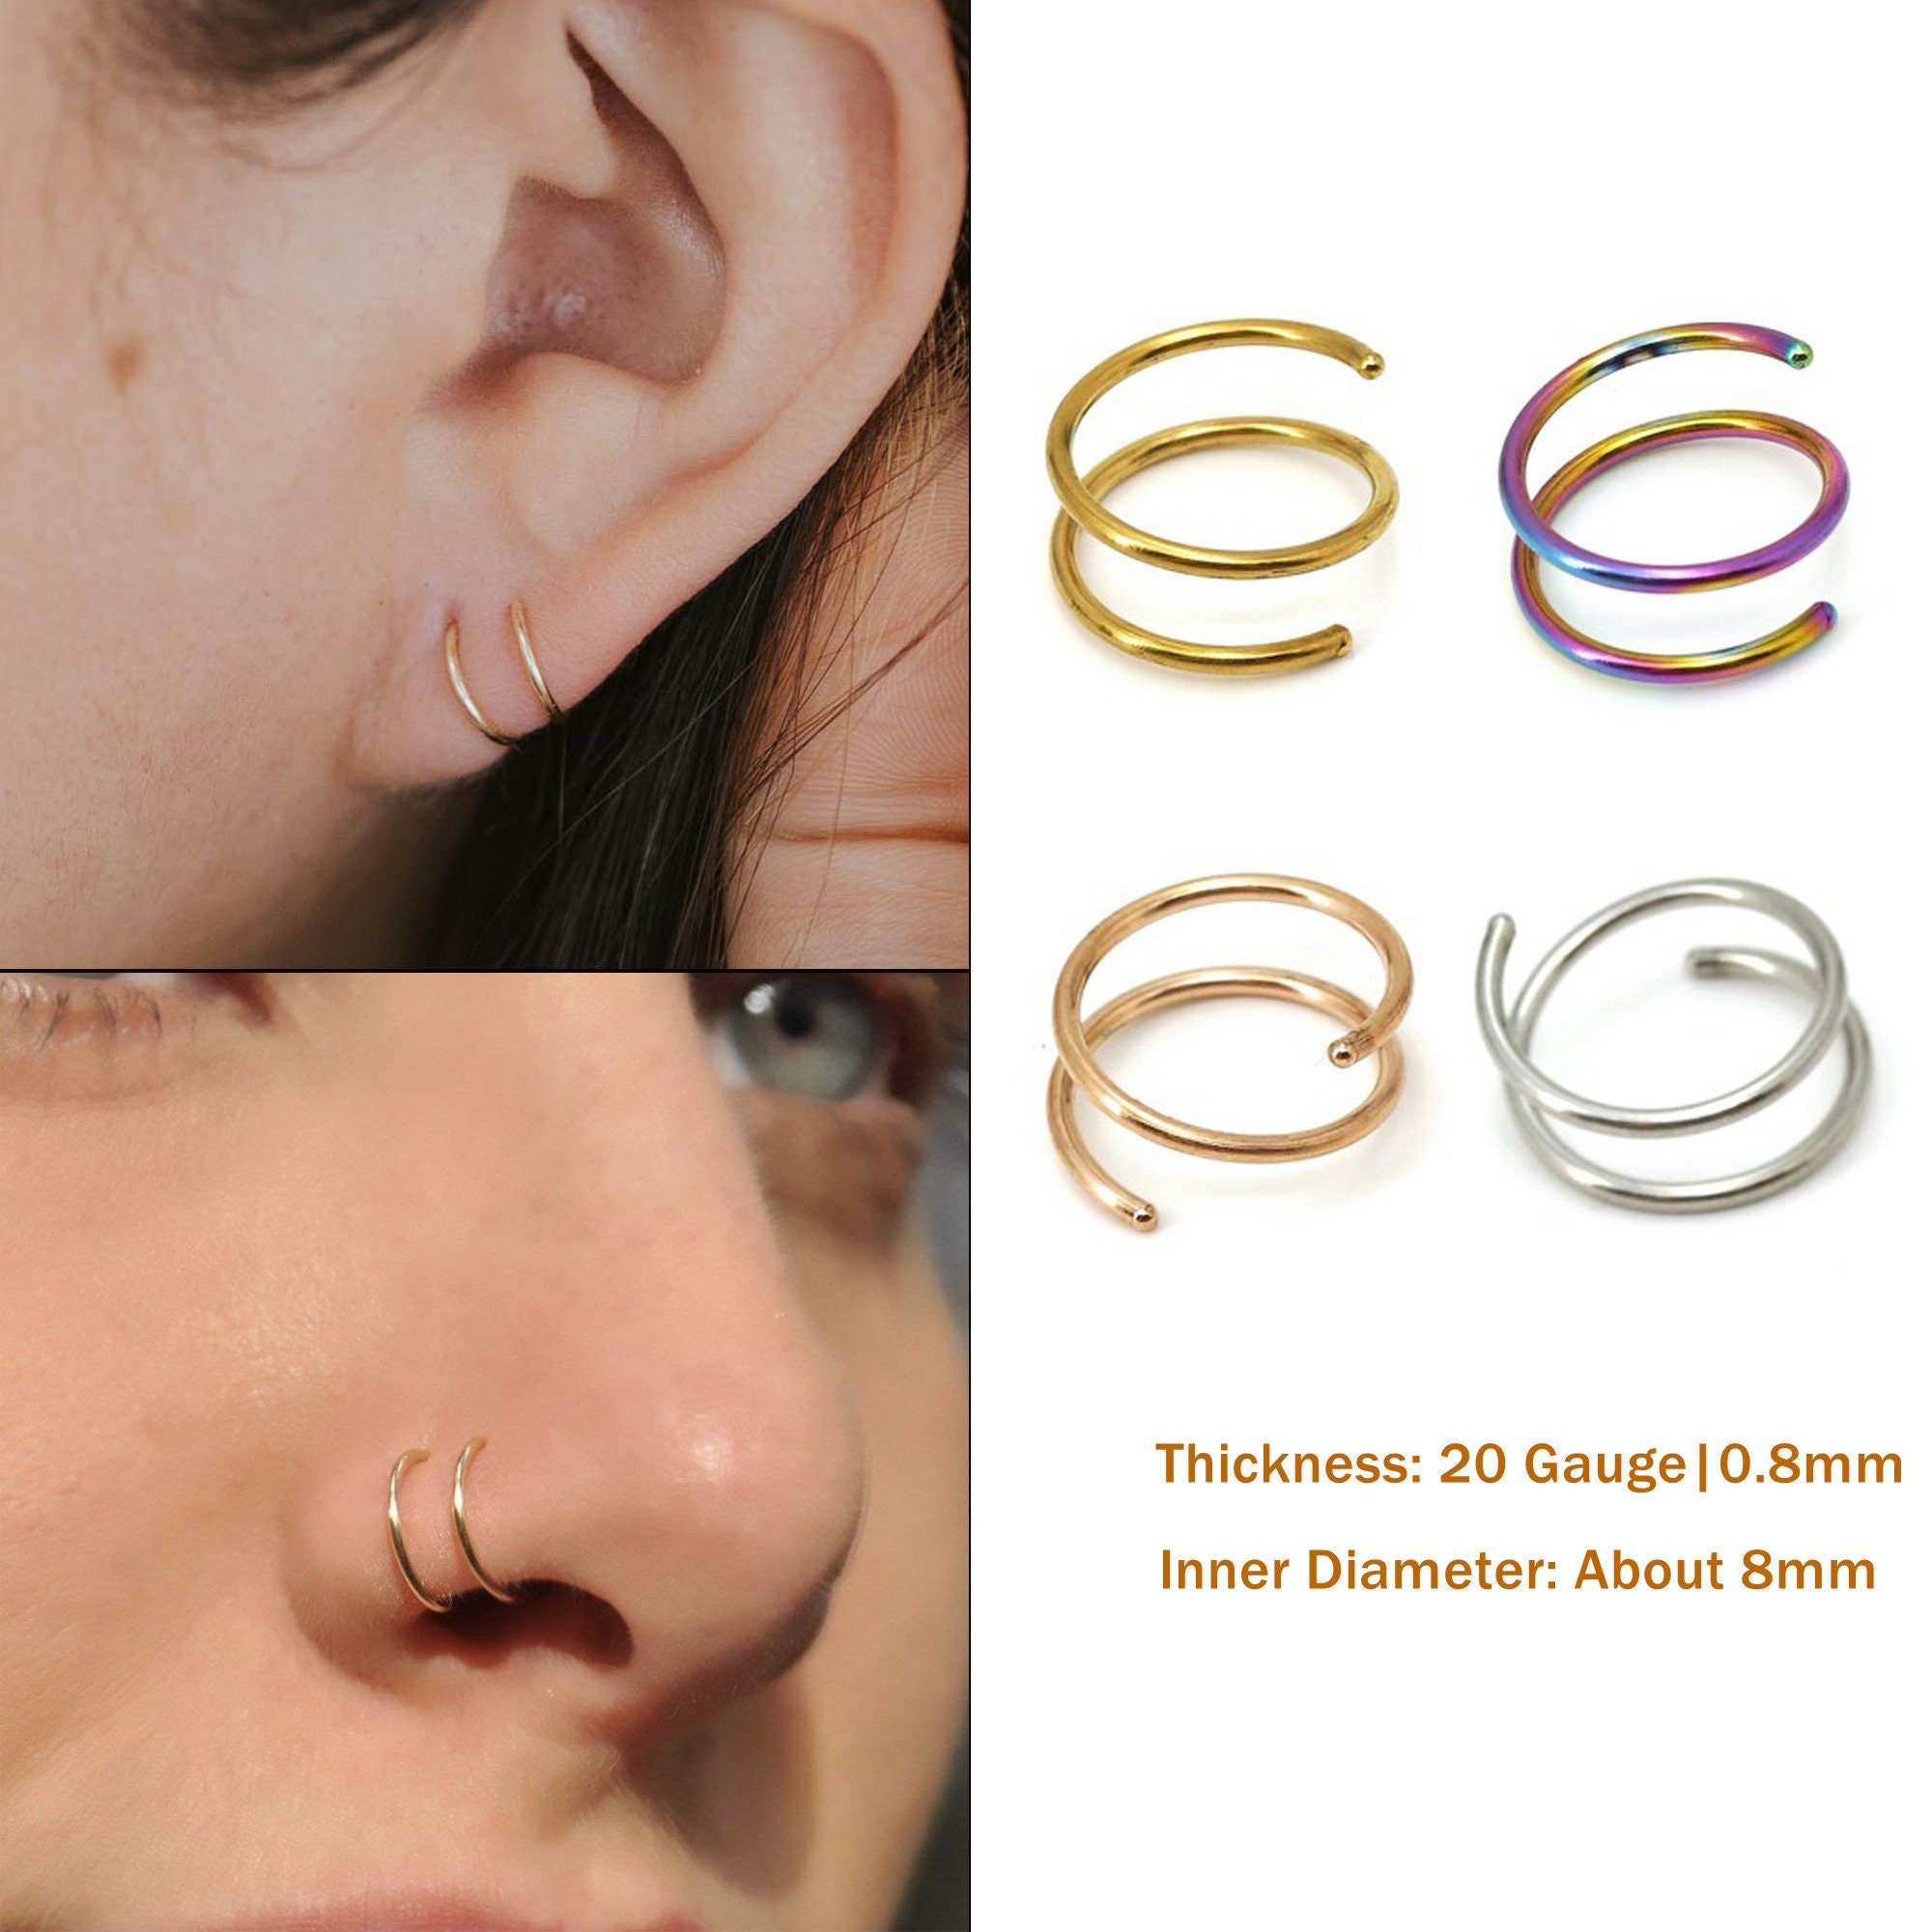 Silver And Gold Nose Spectrum Ring 6 MM 22-Gauge (set Of 3) Surgical Steel  🔥 | eBay